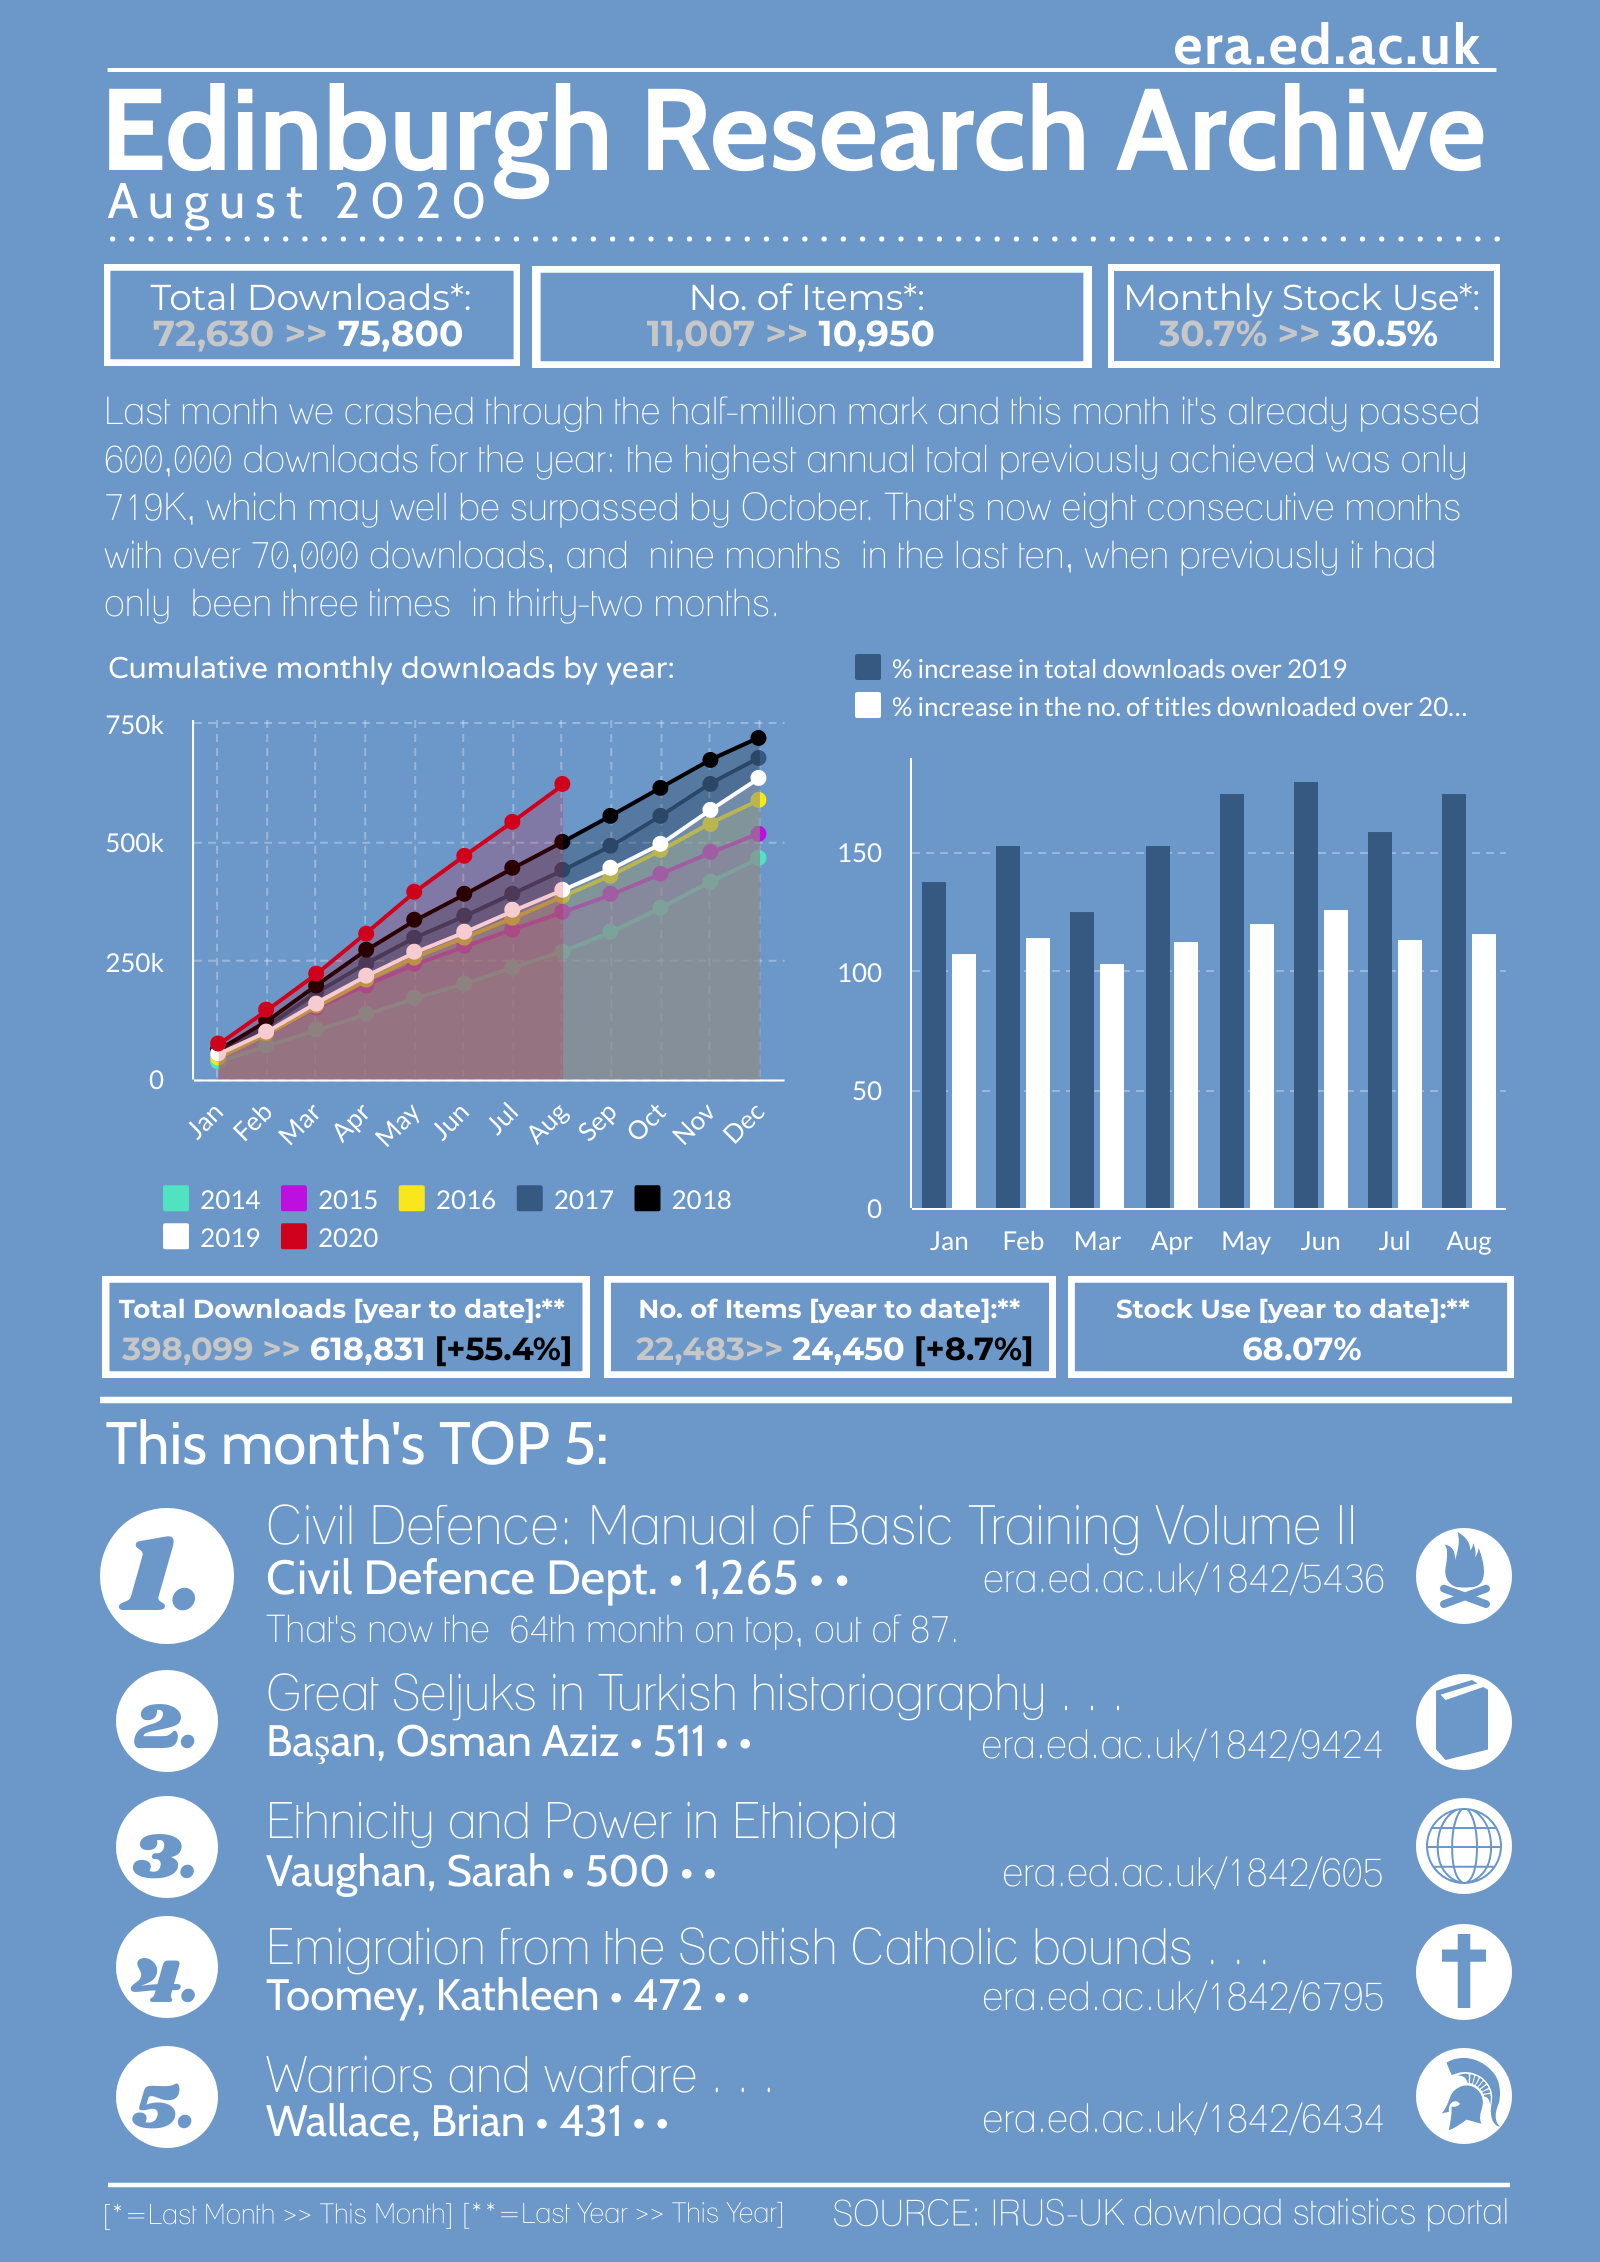 Edinburgh Research Archive: August 2020 downloads infographic